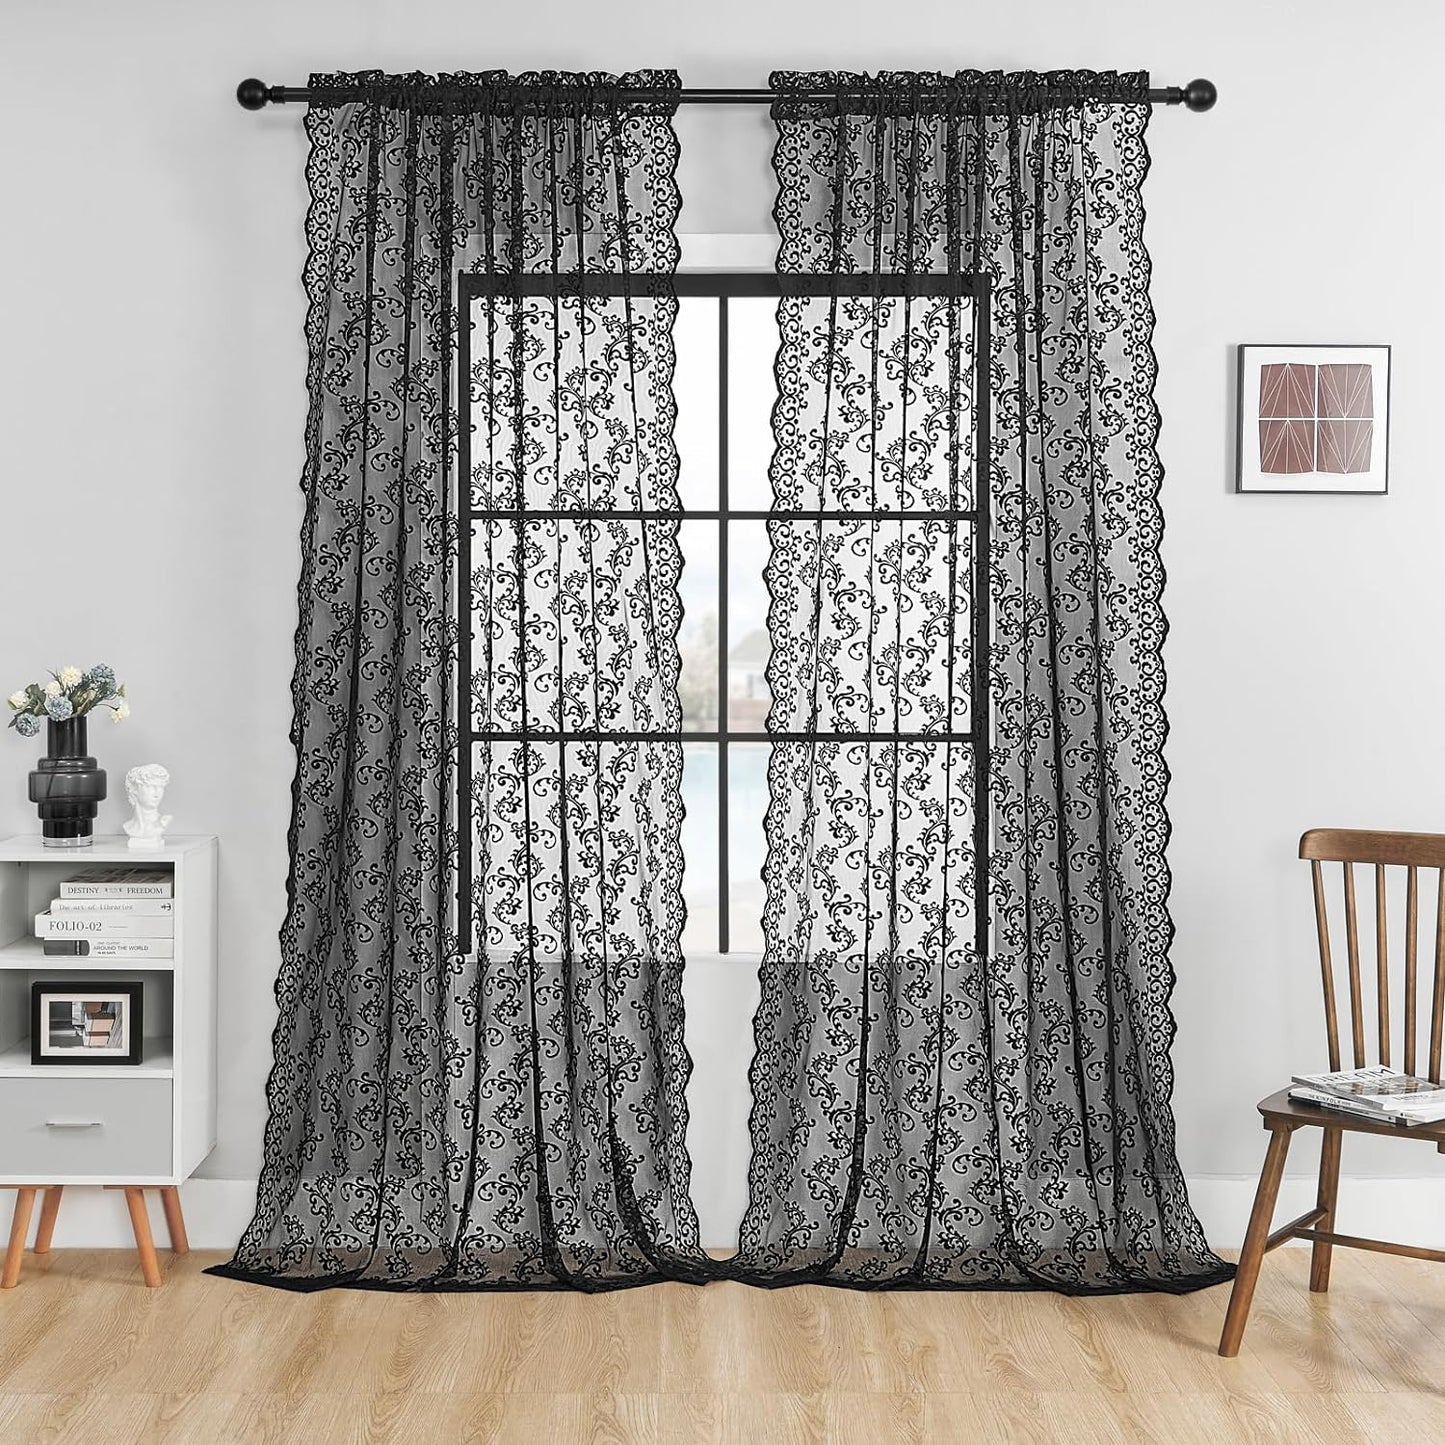 Blush Pink Lace Curtains 84 Inches Long 2 Panels Vintage French Floral Sheer Curtains for Living Room Bedroom Victorian Paisley Drapes Rod Pocket Light Filtering Crochet Window Decor, 52X84  FOLKSIDE Black W52''Xl96'' 